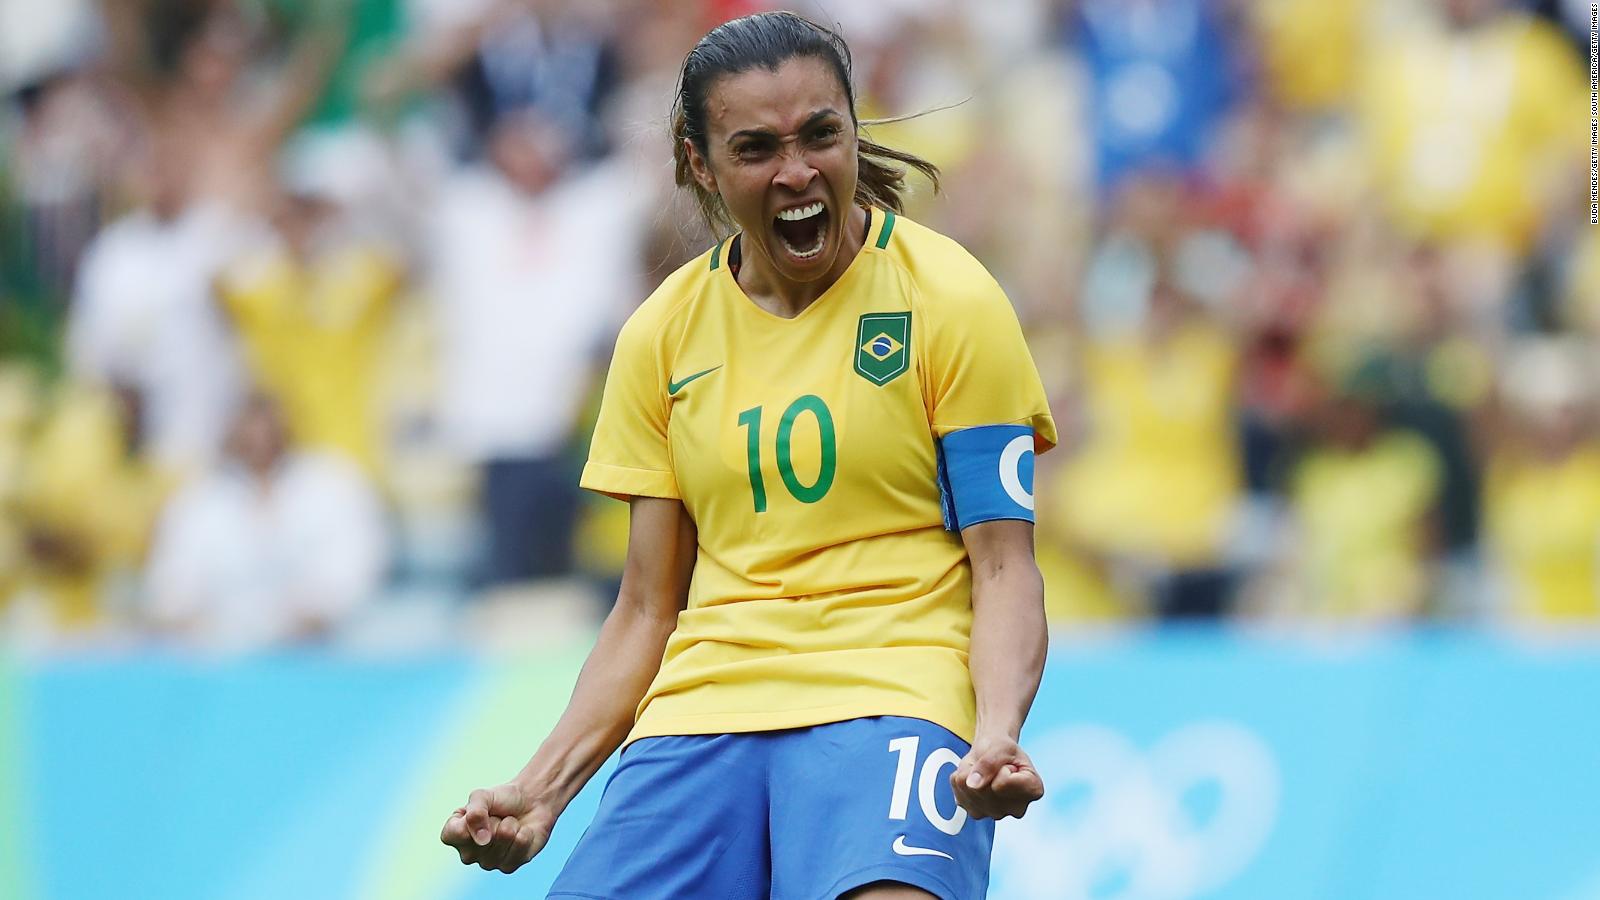 [HIGHLIGHTS] Marta, the best soccer player in history, reveals what she ...